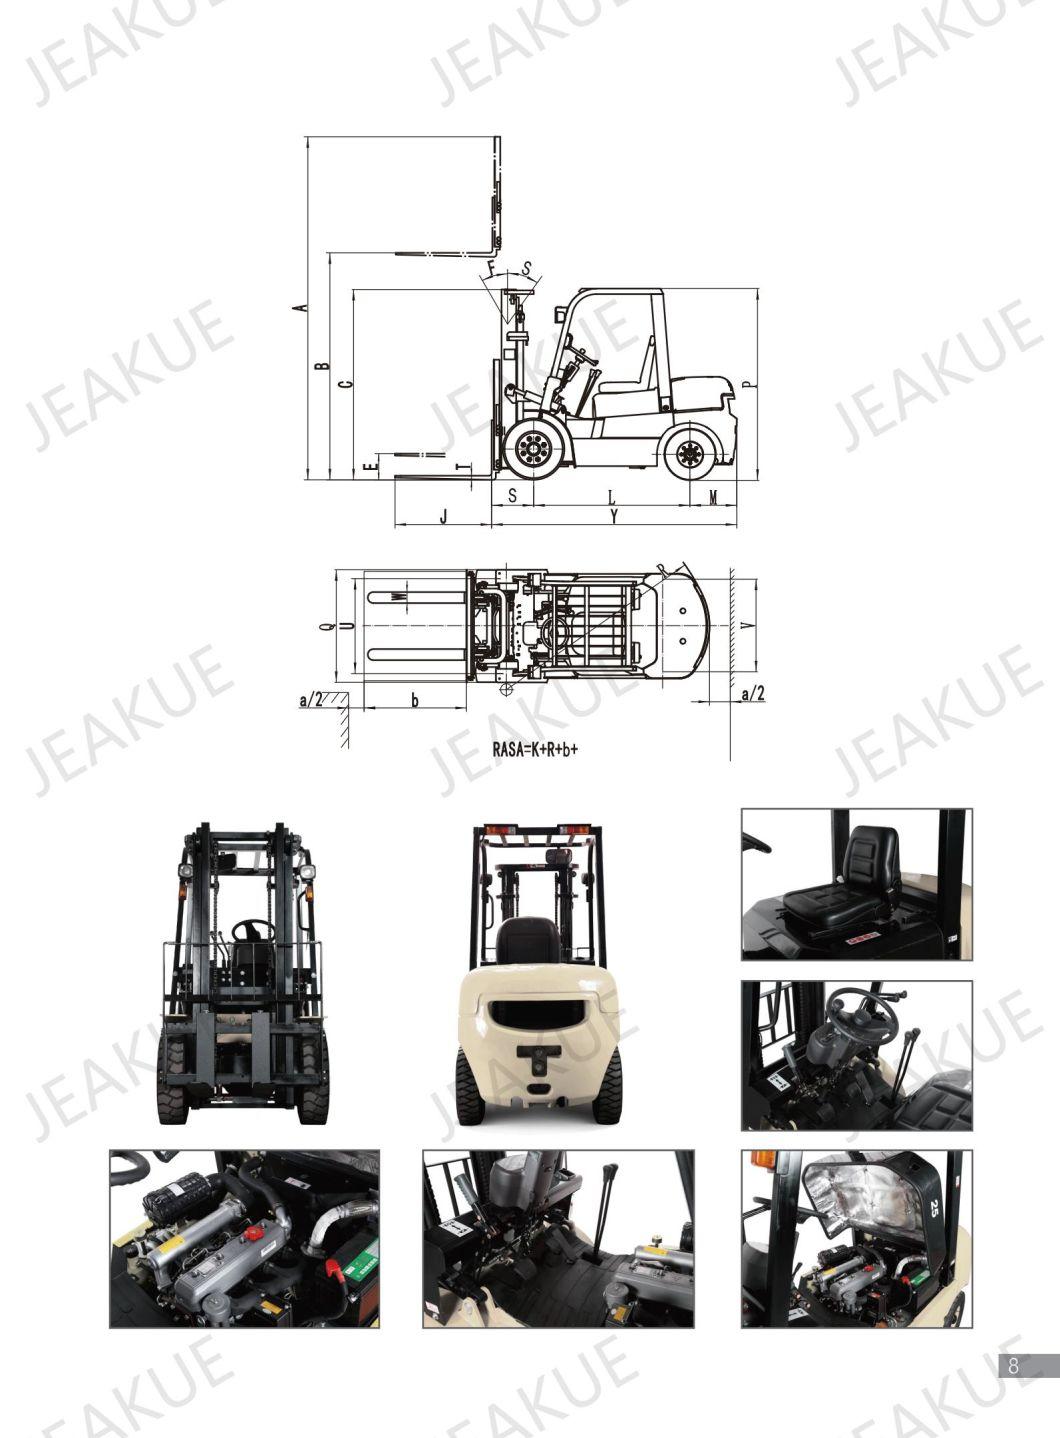 China Automatic Transmission 3t Hydraulic Diesel Forklift